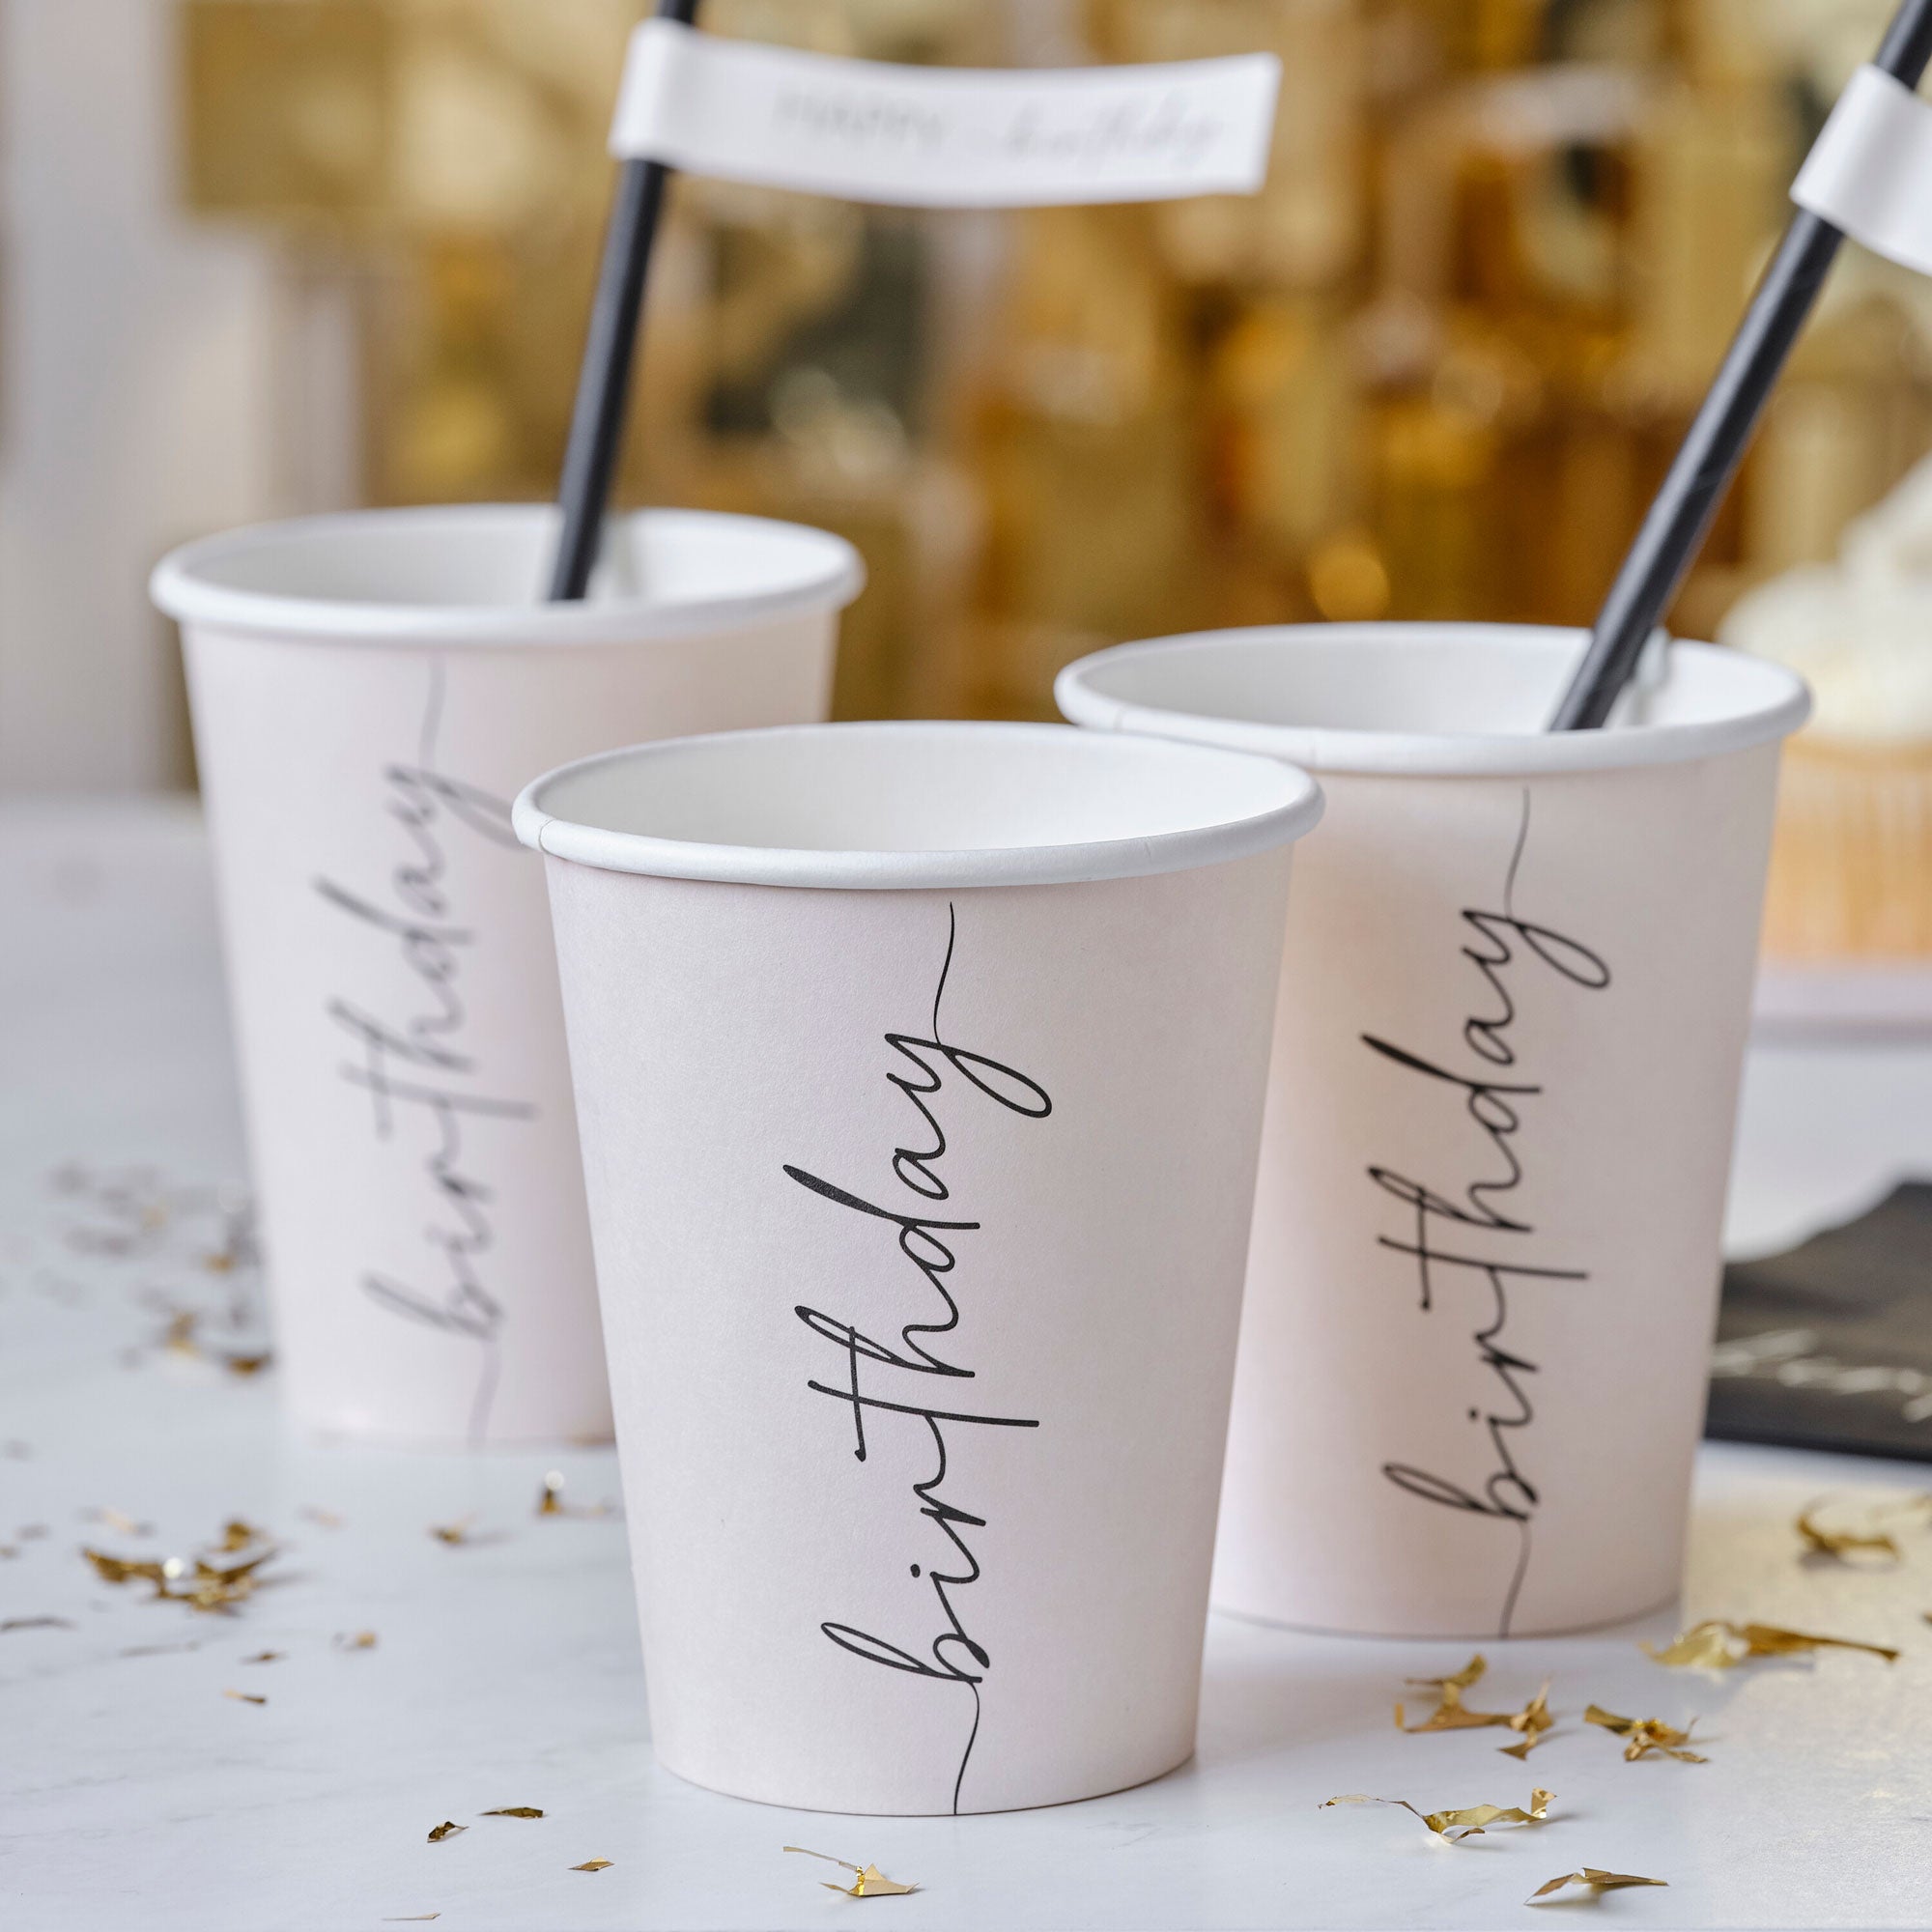 Champagne Noir Nude and Black Happy Birthday Paper Party Cups